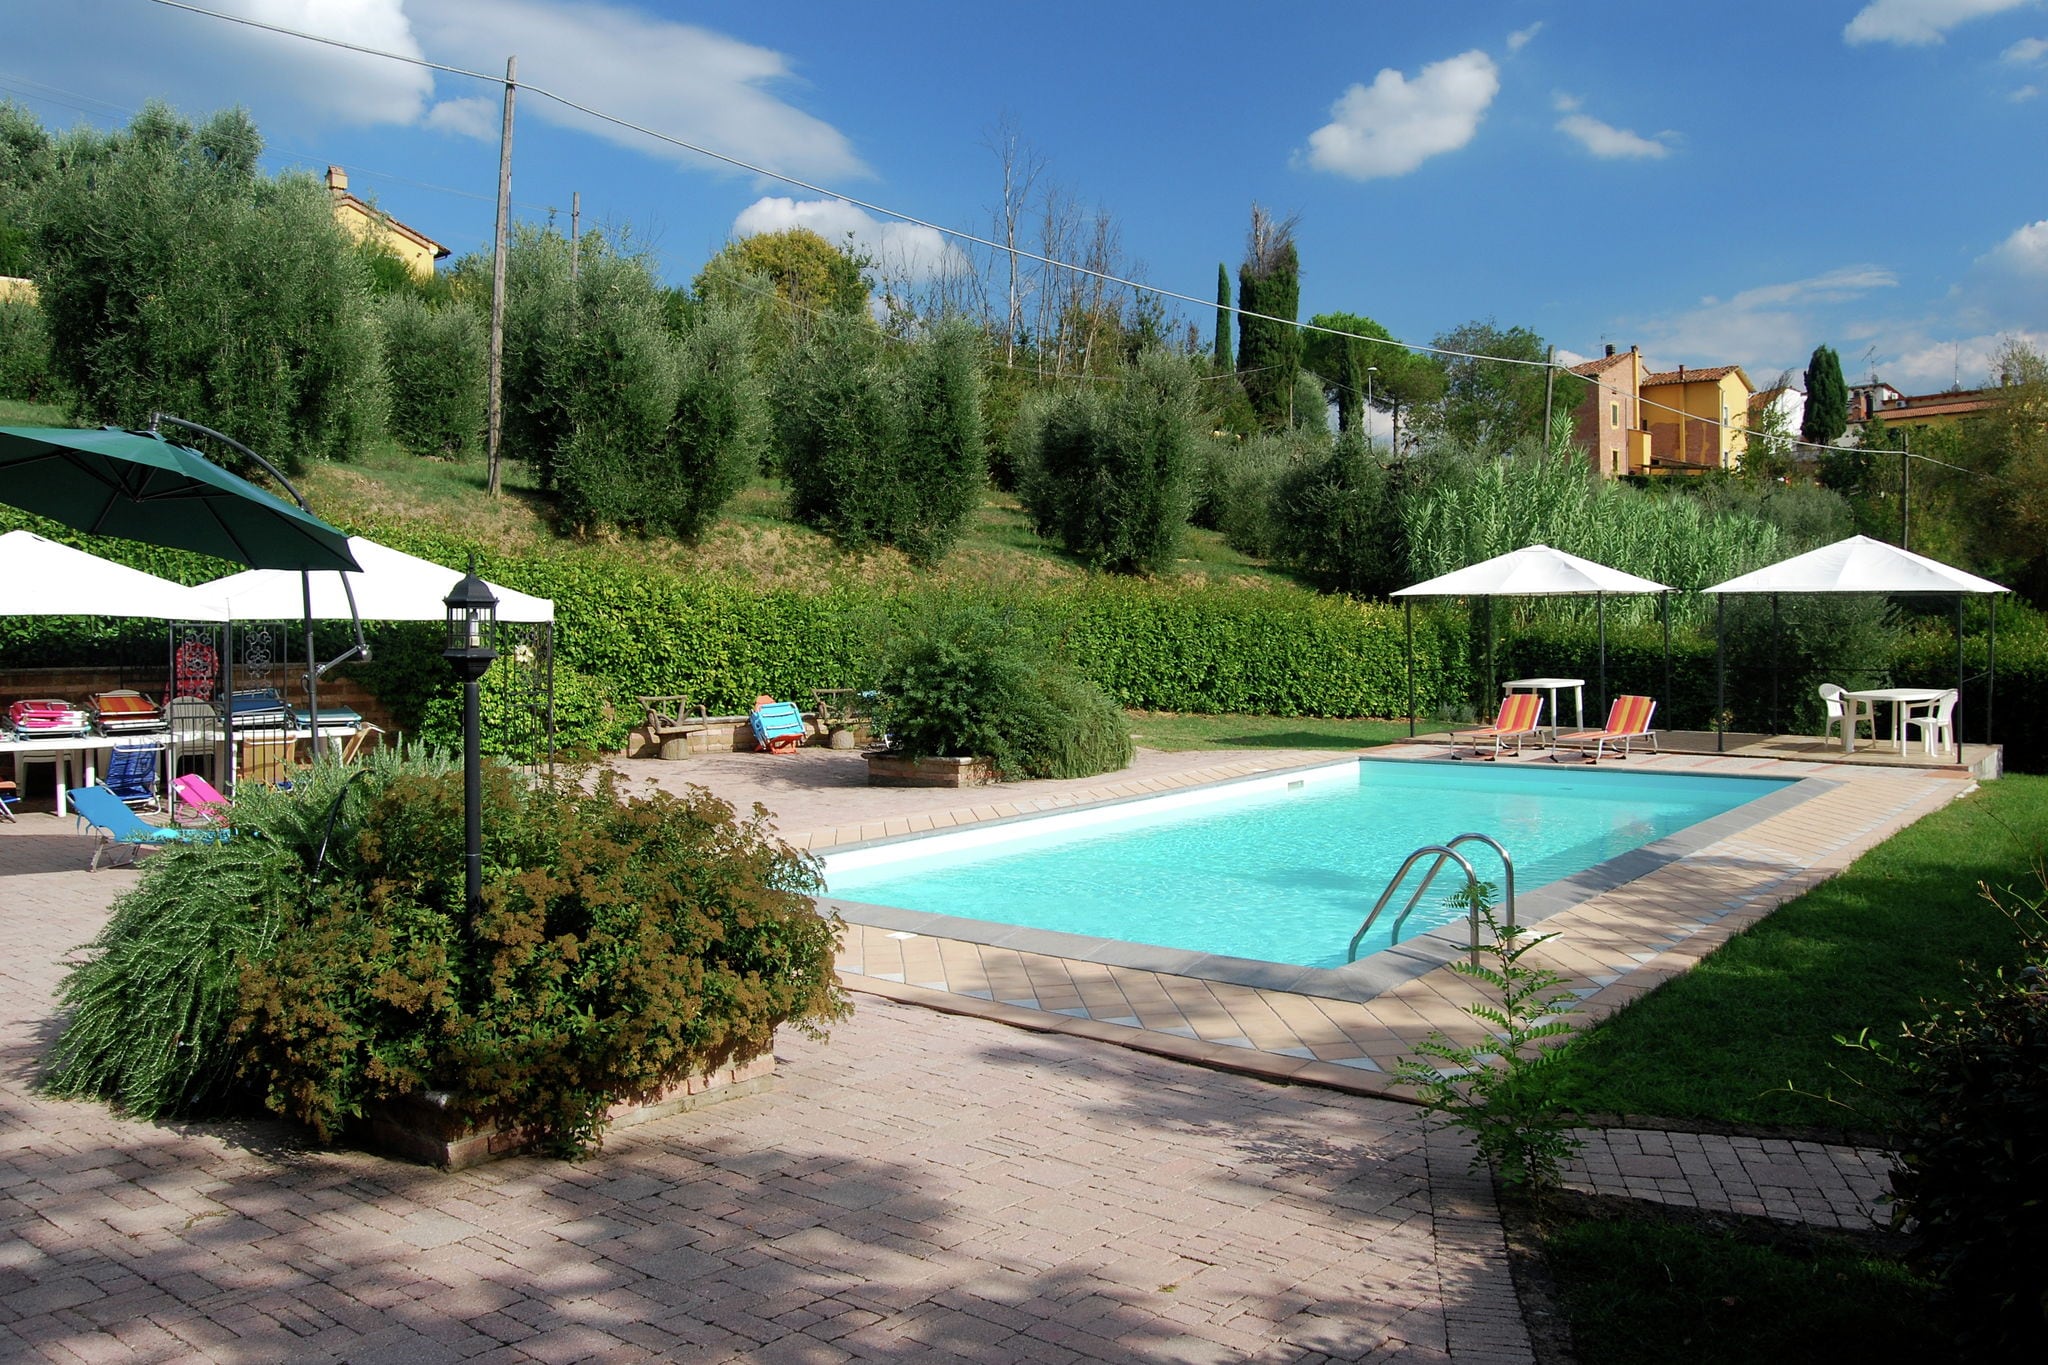 Charming holiday home between Florence and Pisa.